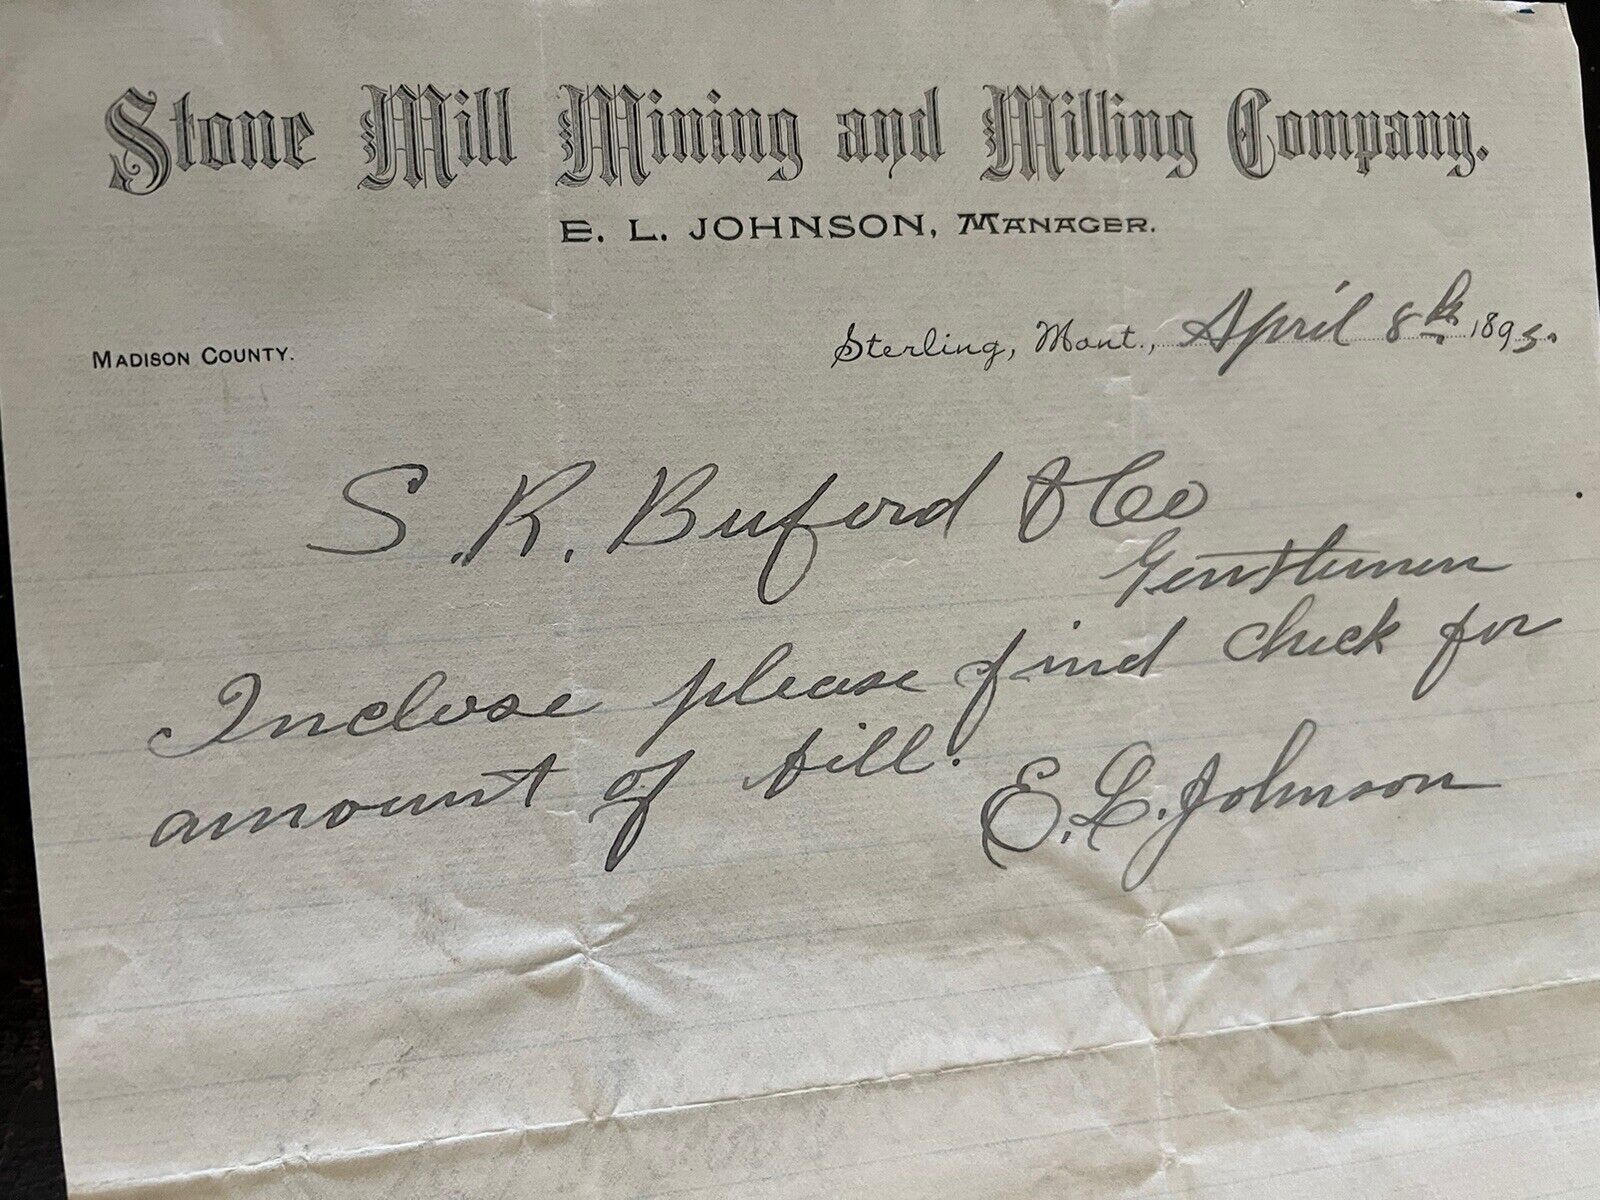 April 8, 1895 - Sterling, MT Original Letterhead: Stone Mill Mining and Milling